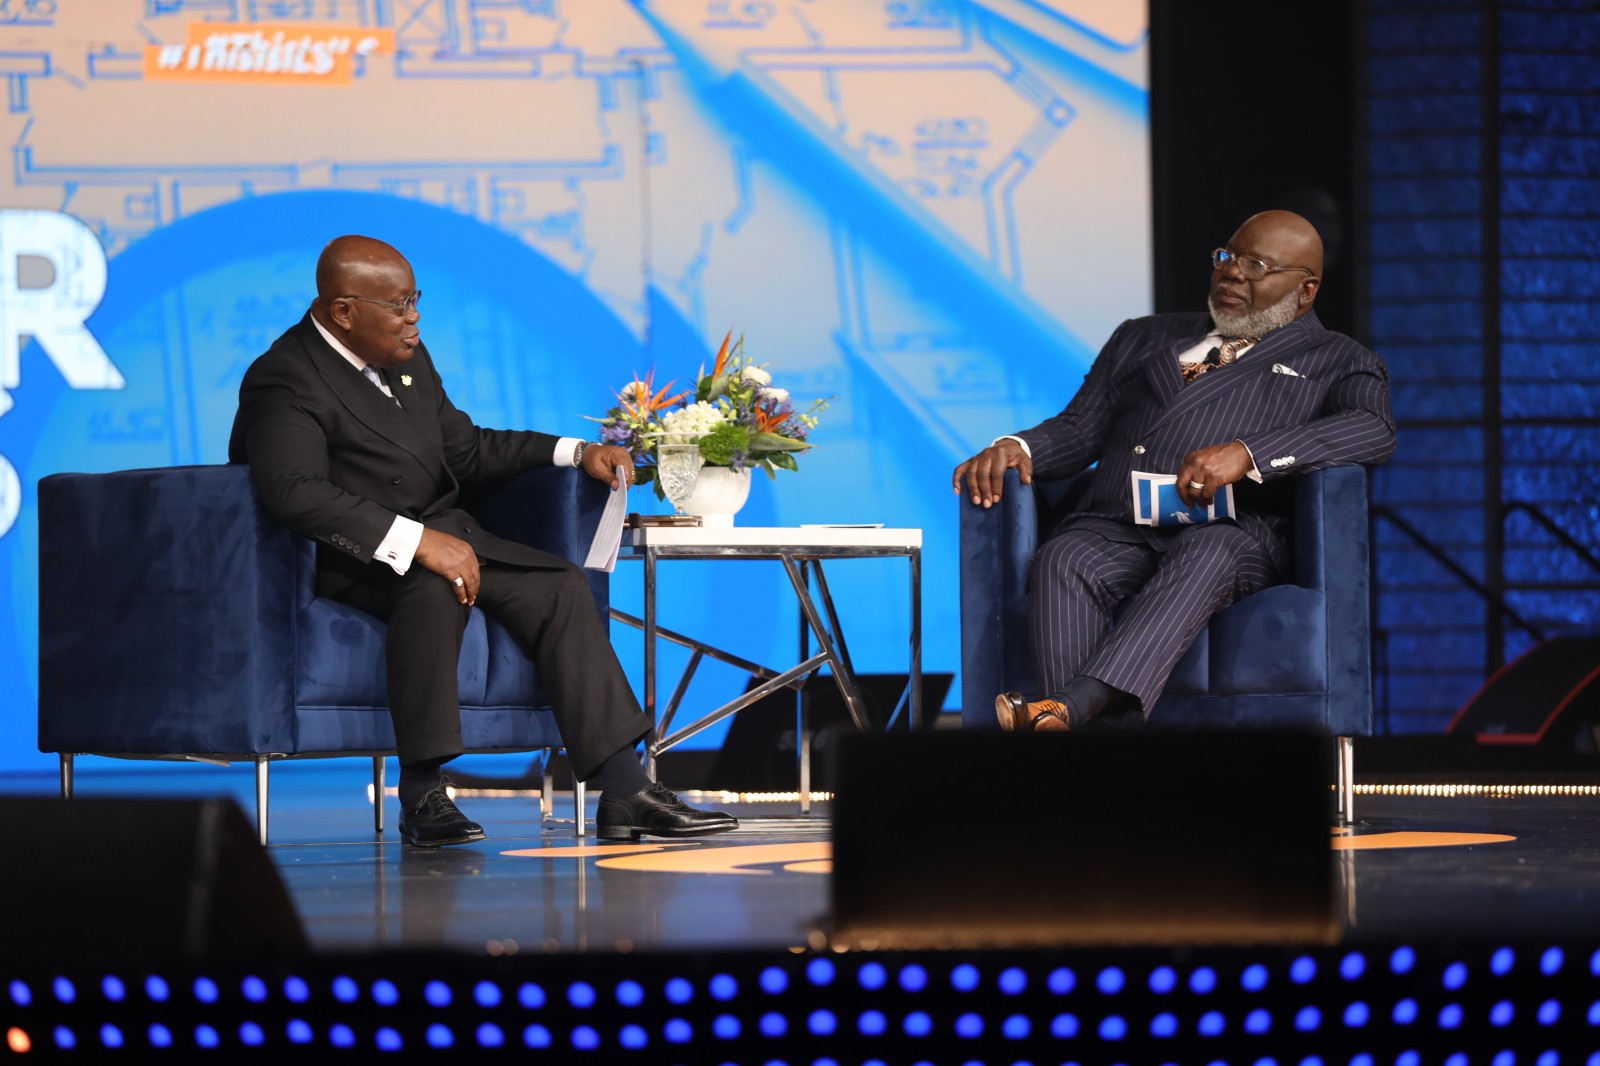 T.D. Jakes Shook The Room at the 2022 International Leadership